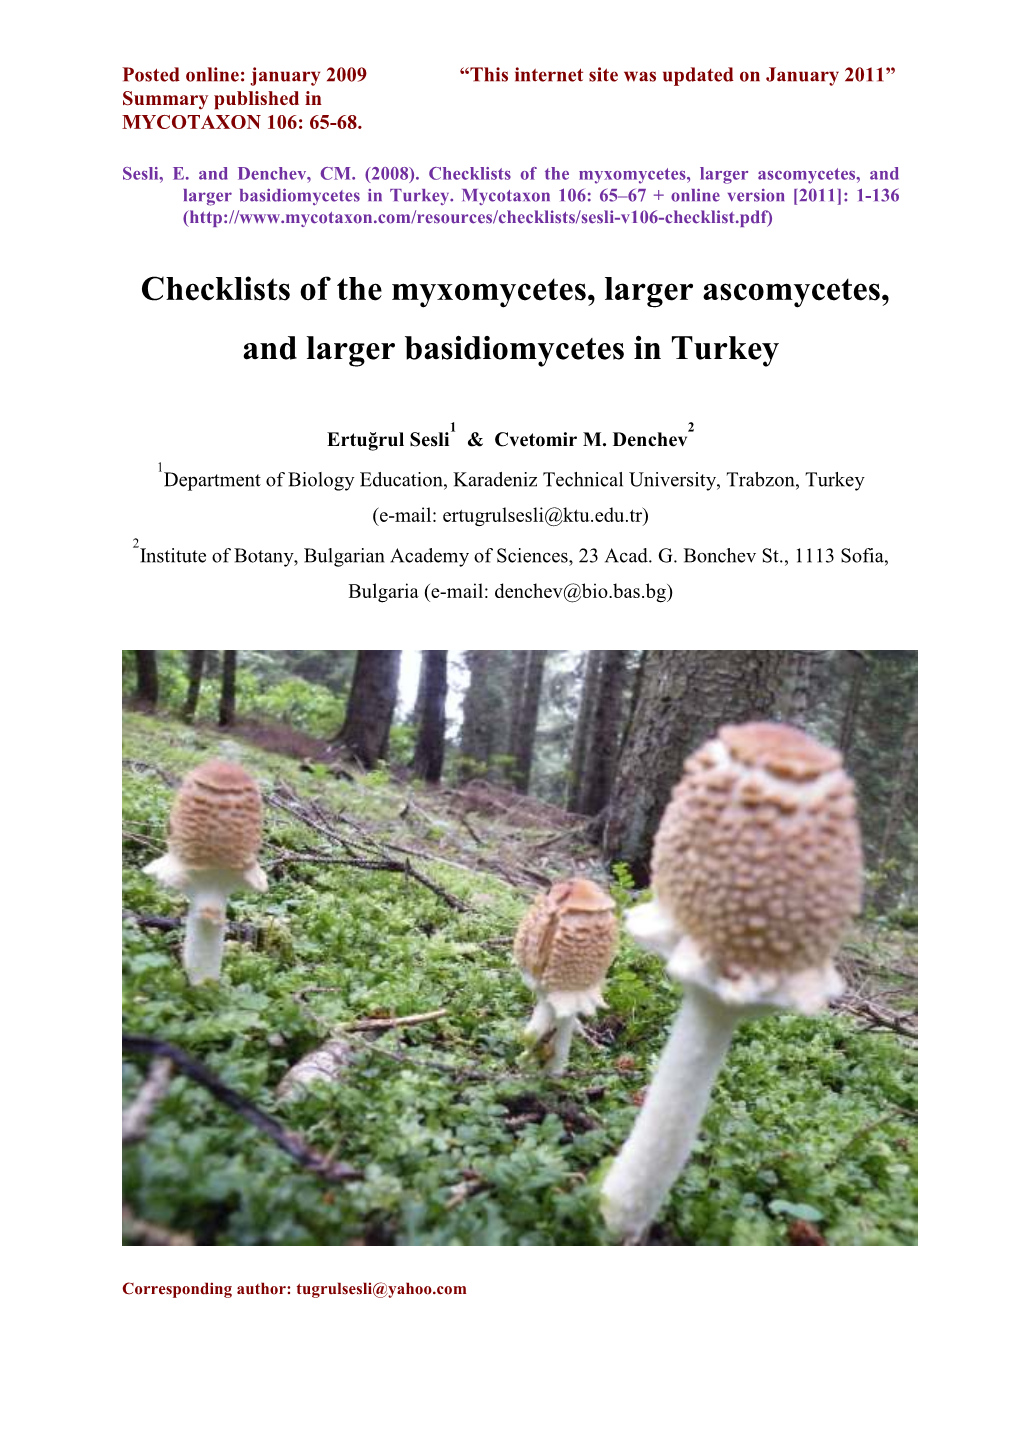 Checklists of the Myxomycetes, Larger Ascomycetes, and Larger